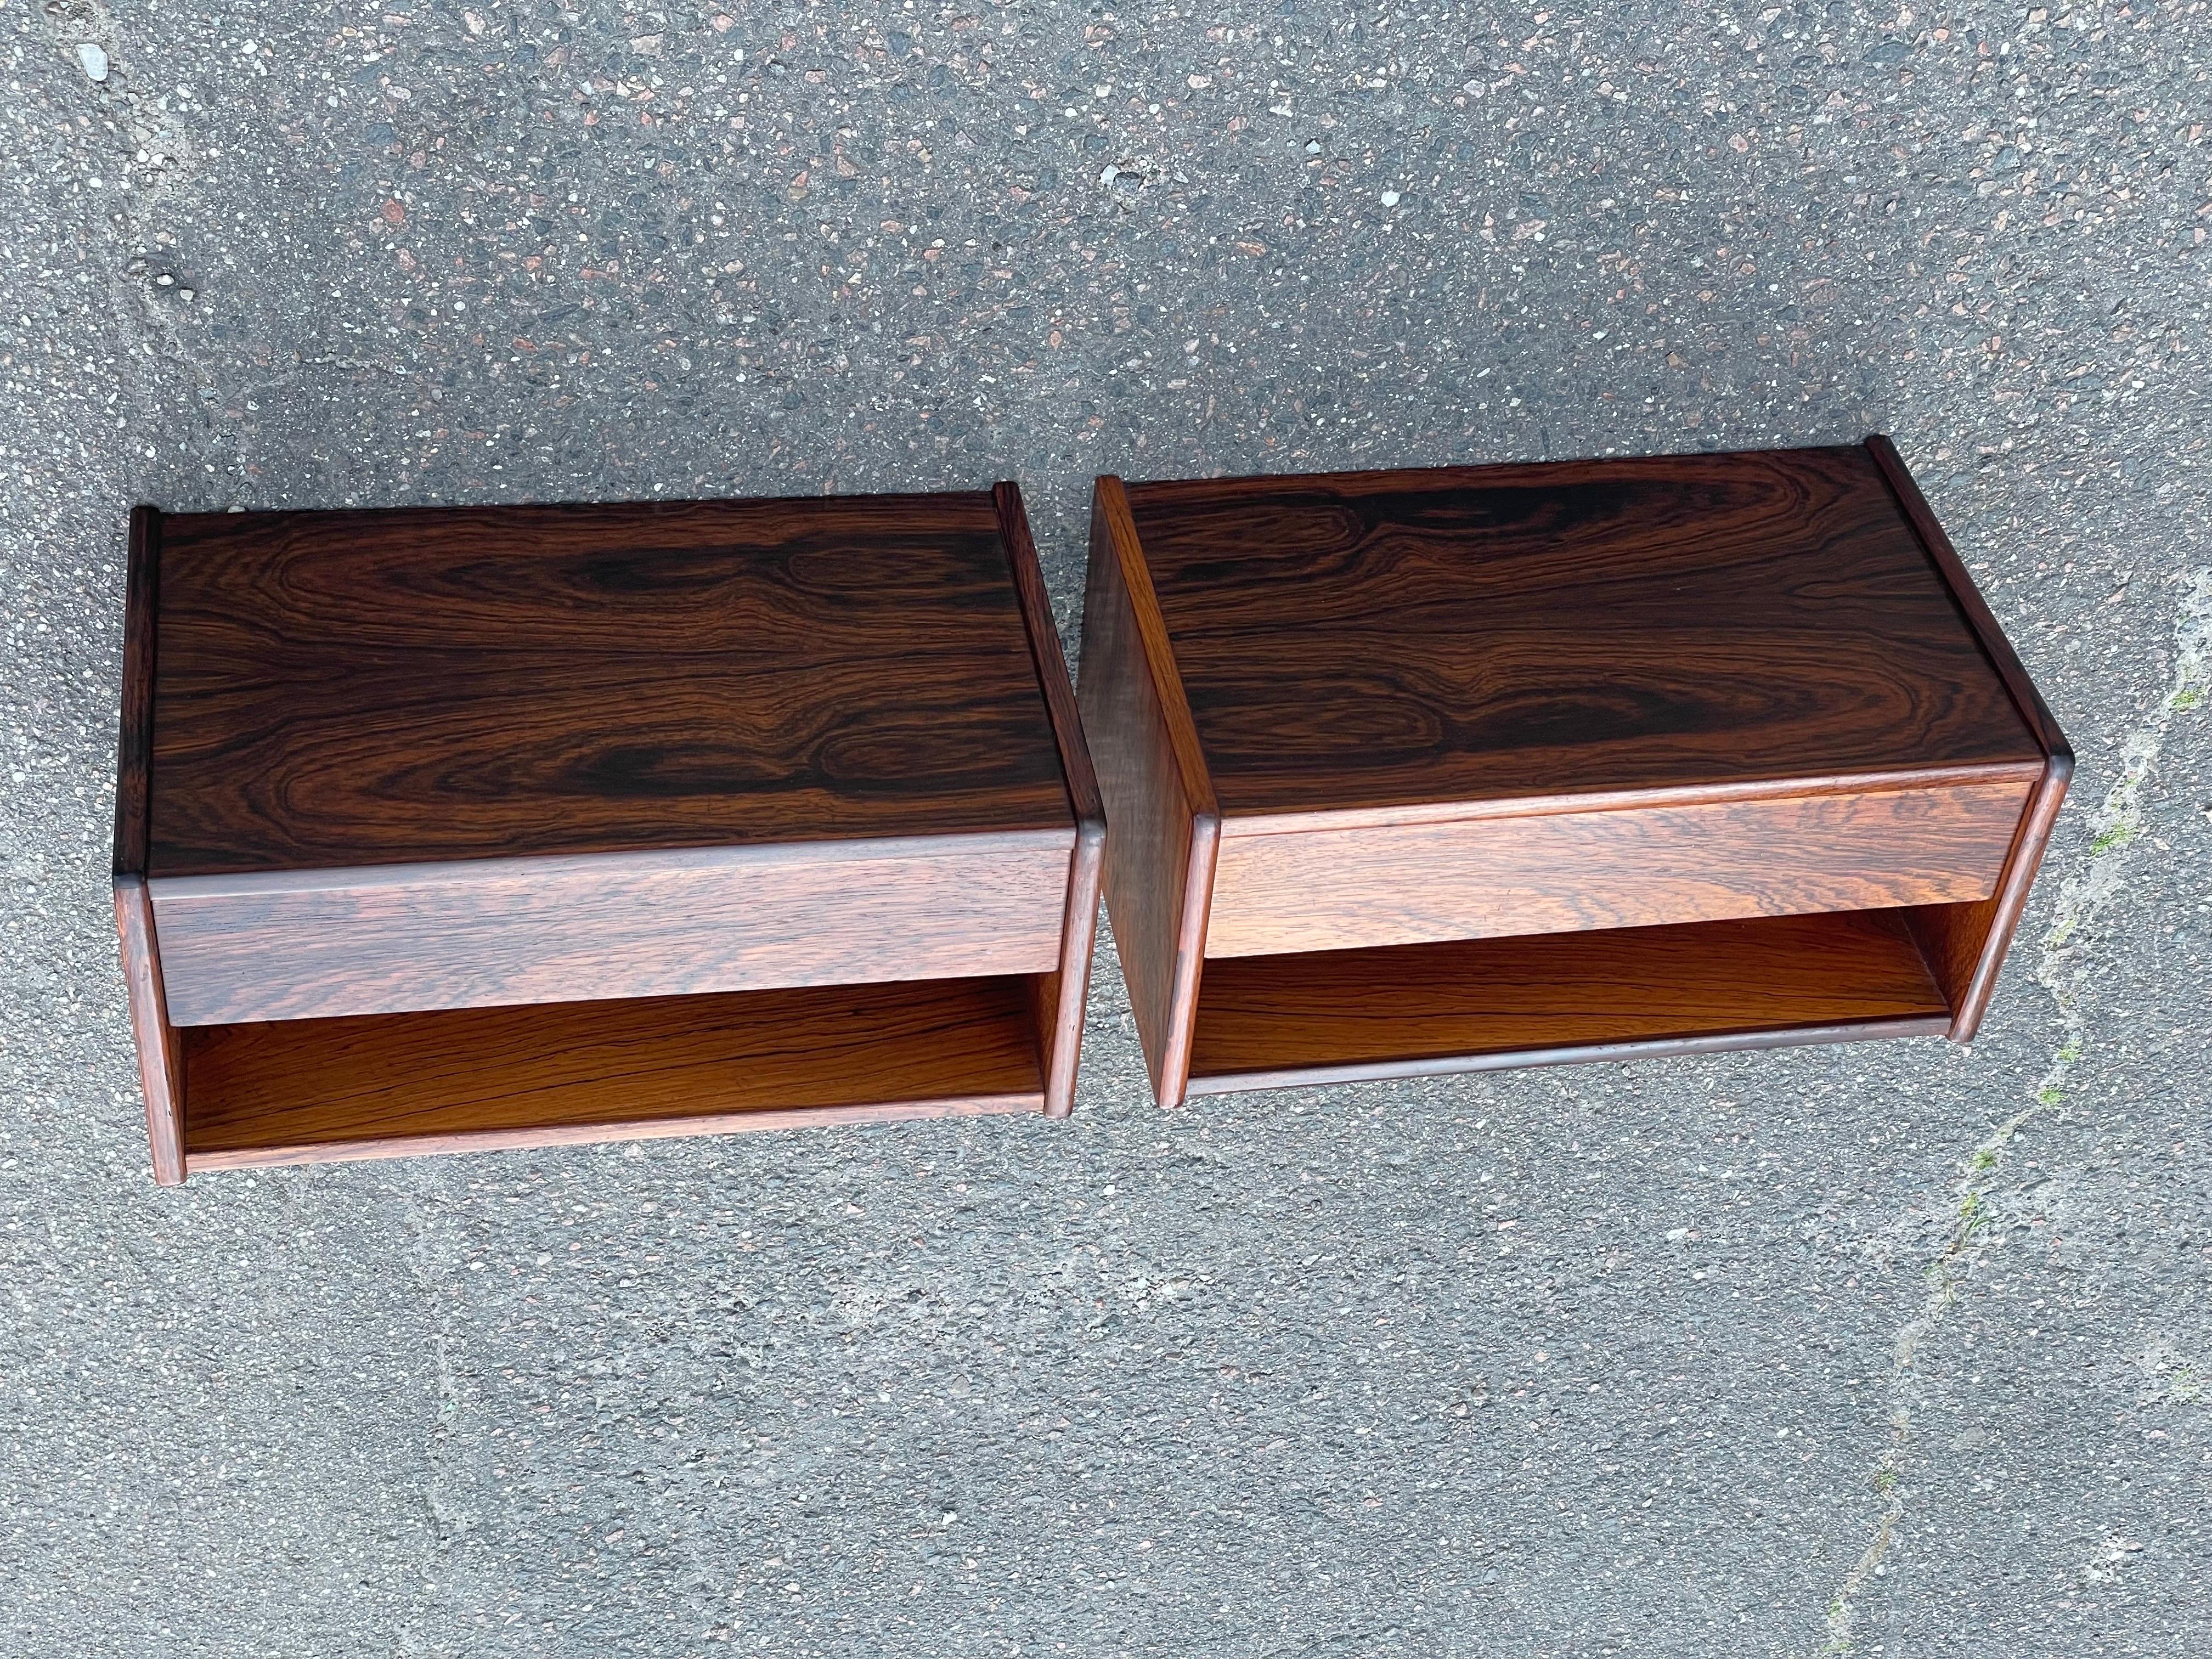 Wood Stunning Set of Danish Mid-Century Modern Floating Nightstands from the, 1960s For Sale